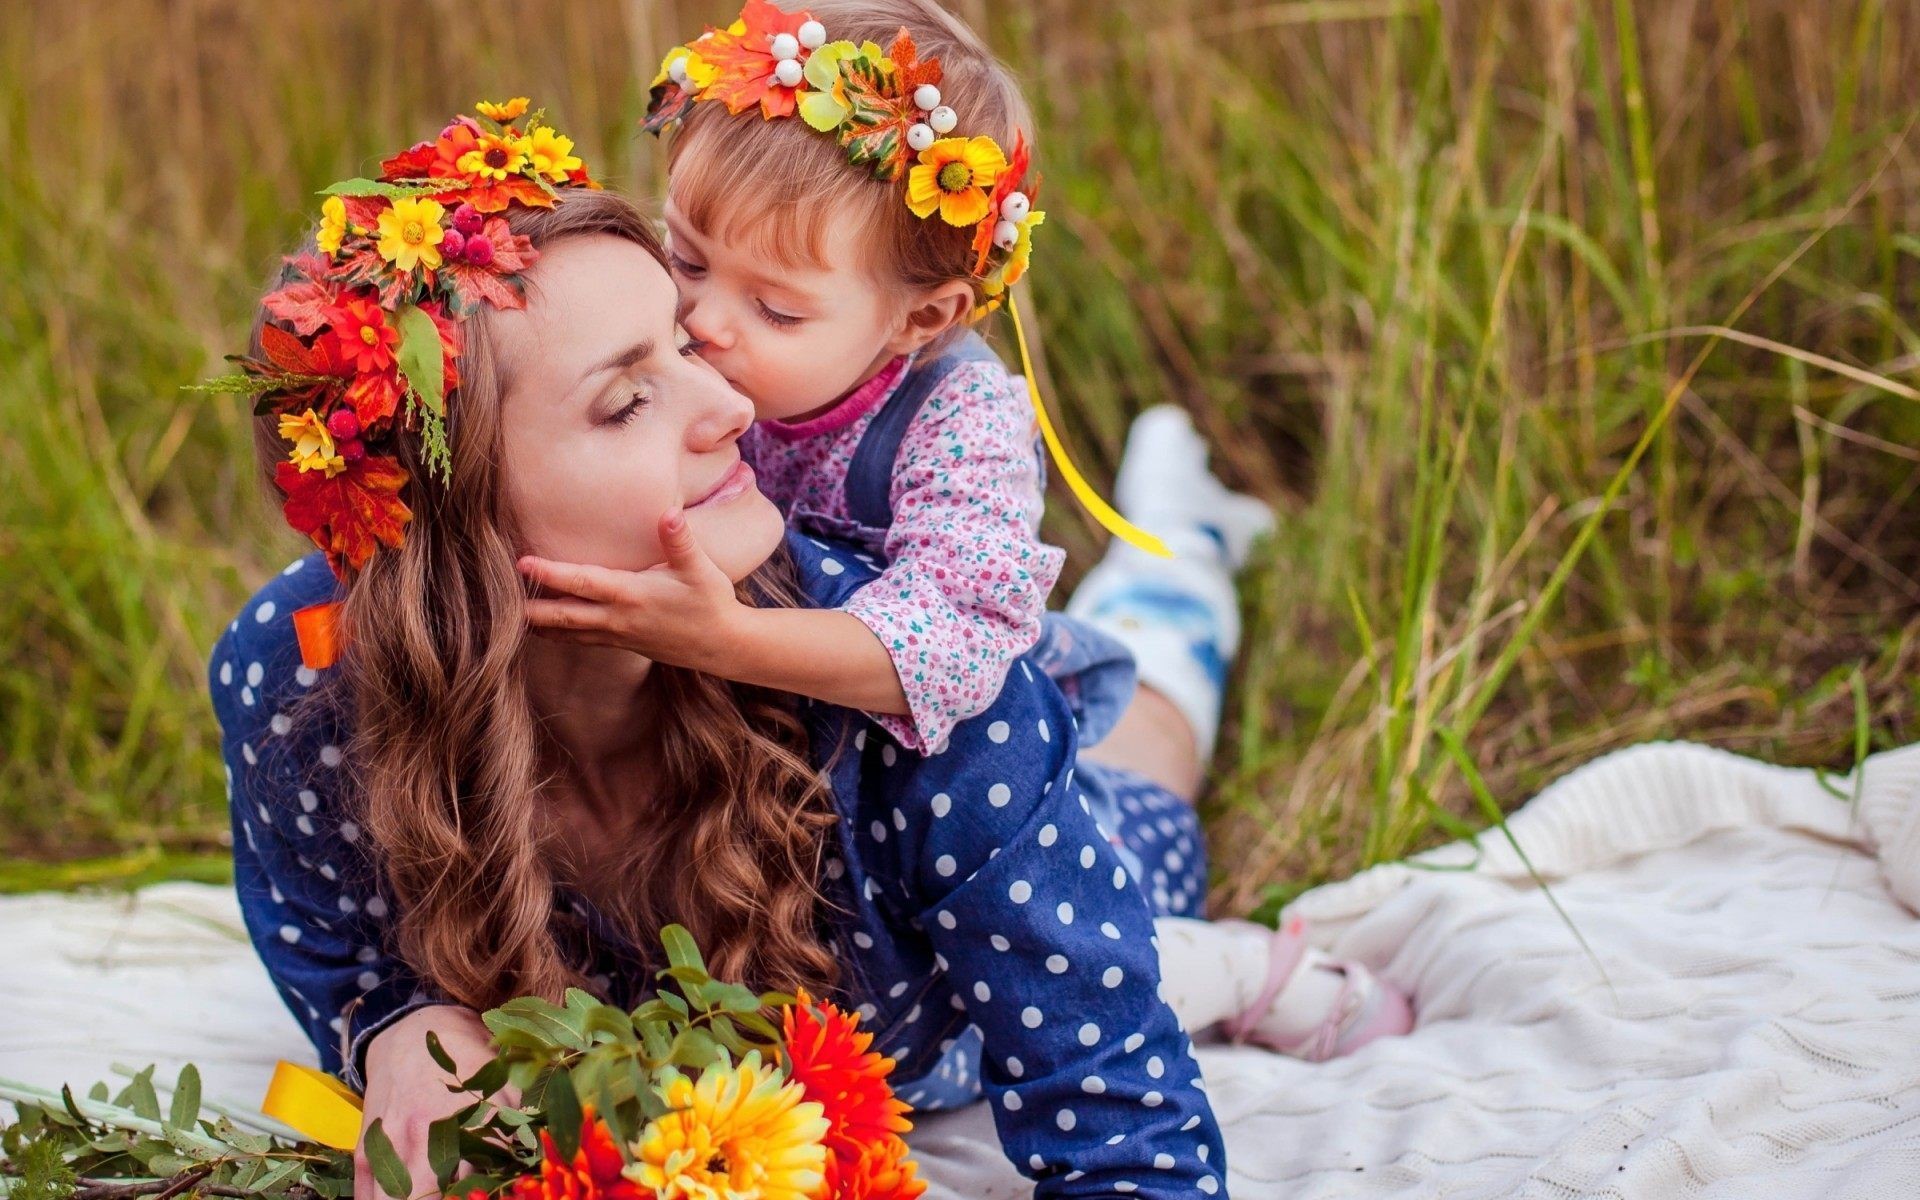 Mother Daughter Love Wallpaper Download Of Cute Family - Love You Mom Hd -  1920x1200 Wallpaper 